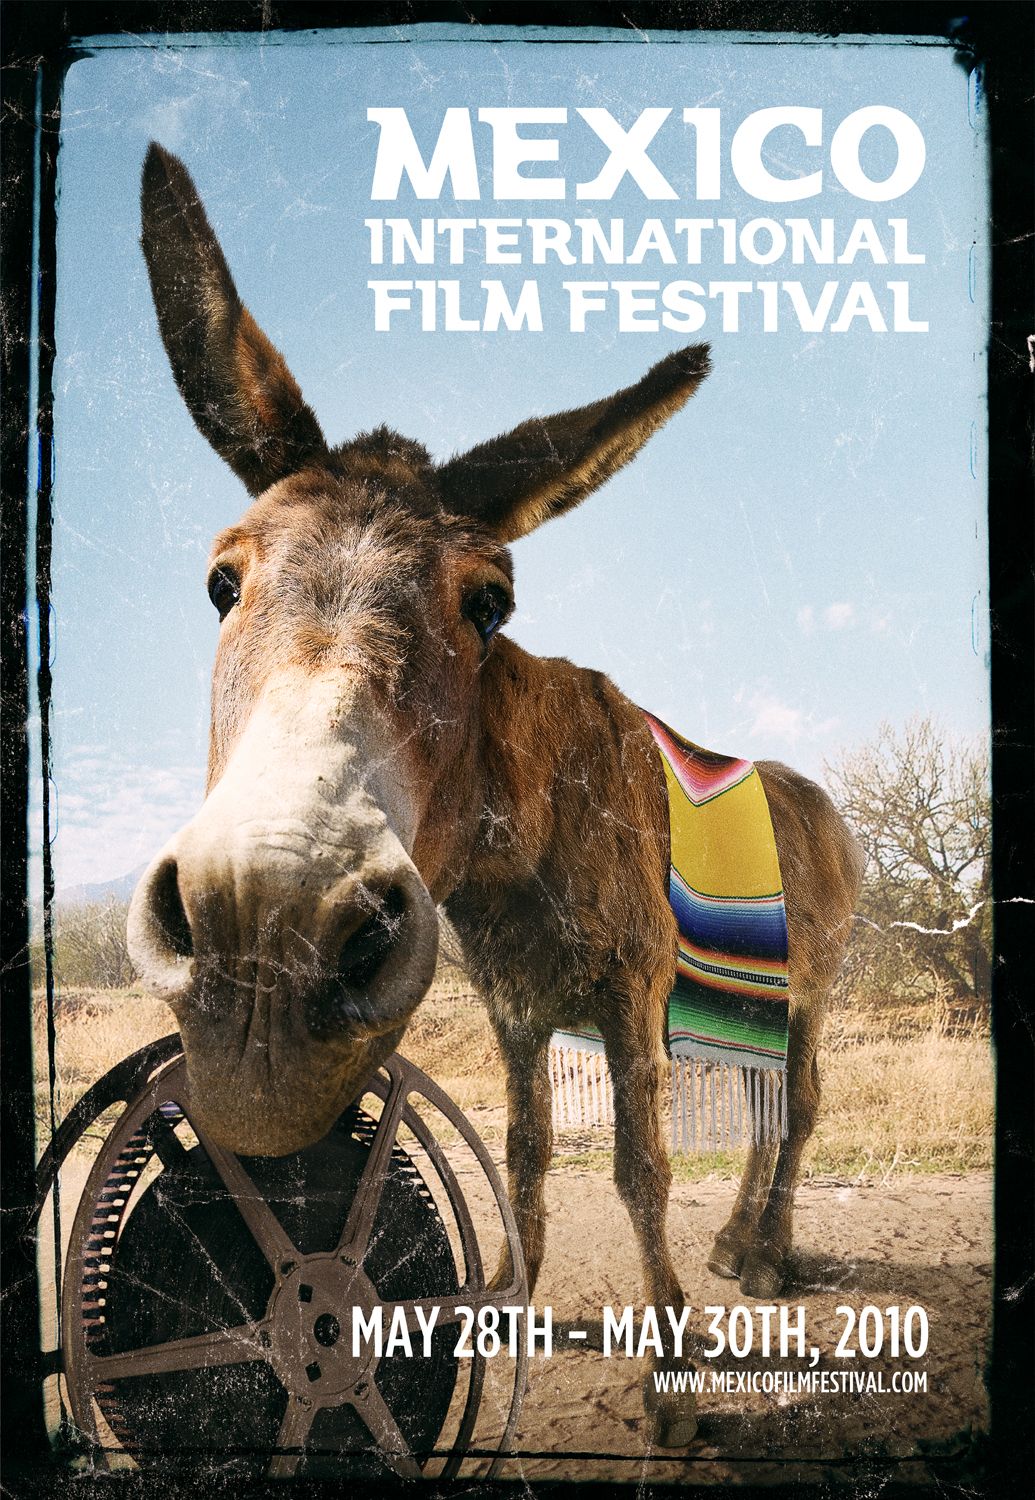 Extra Large TV Poster Image for Mexican International Film Festival 